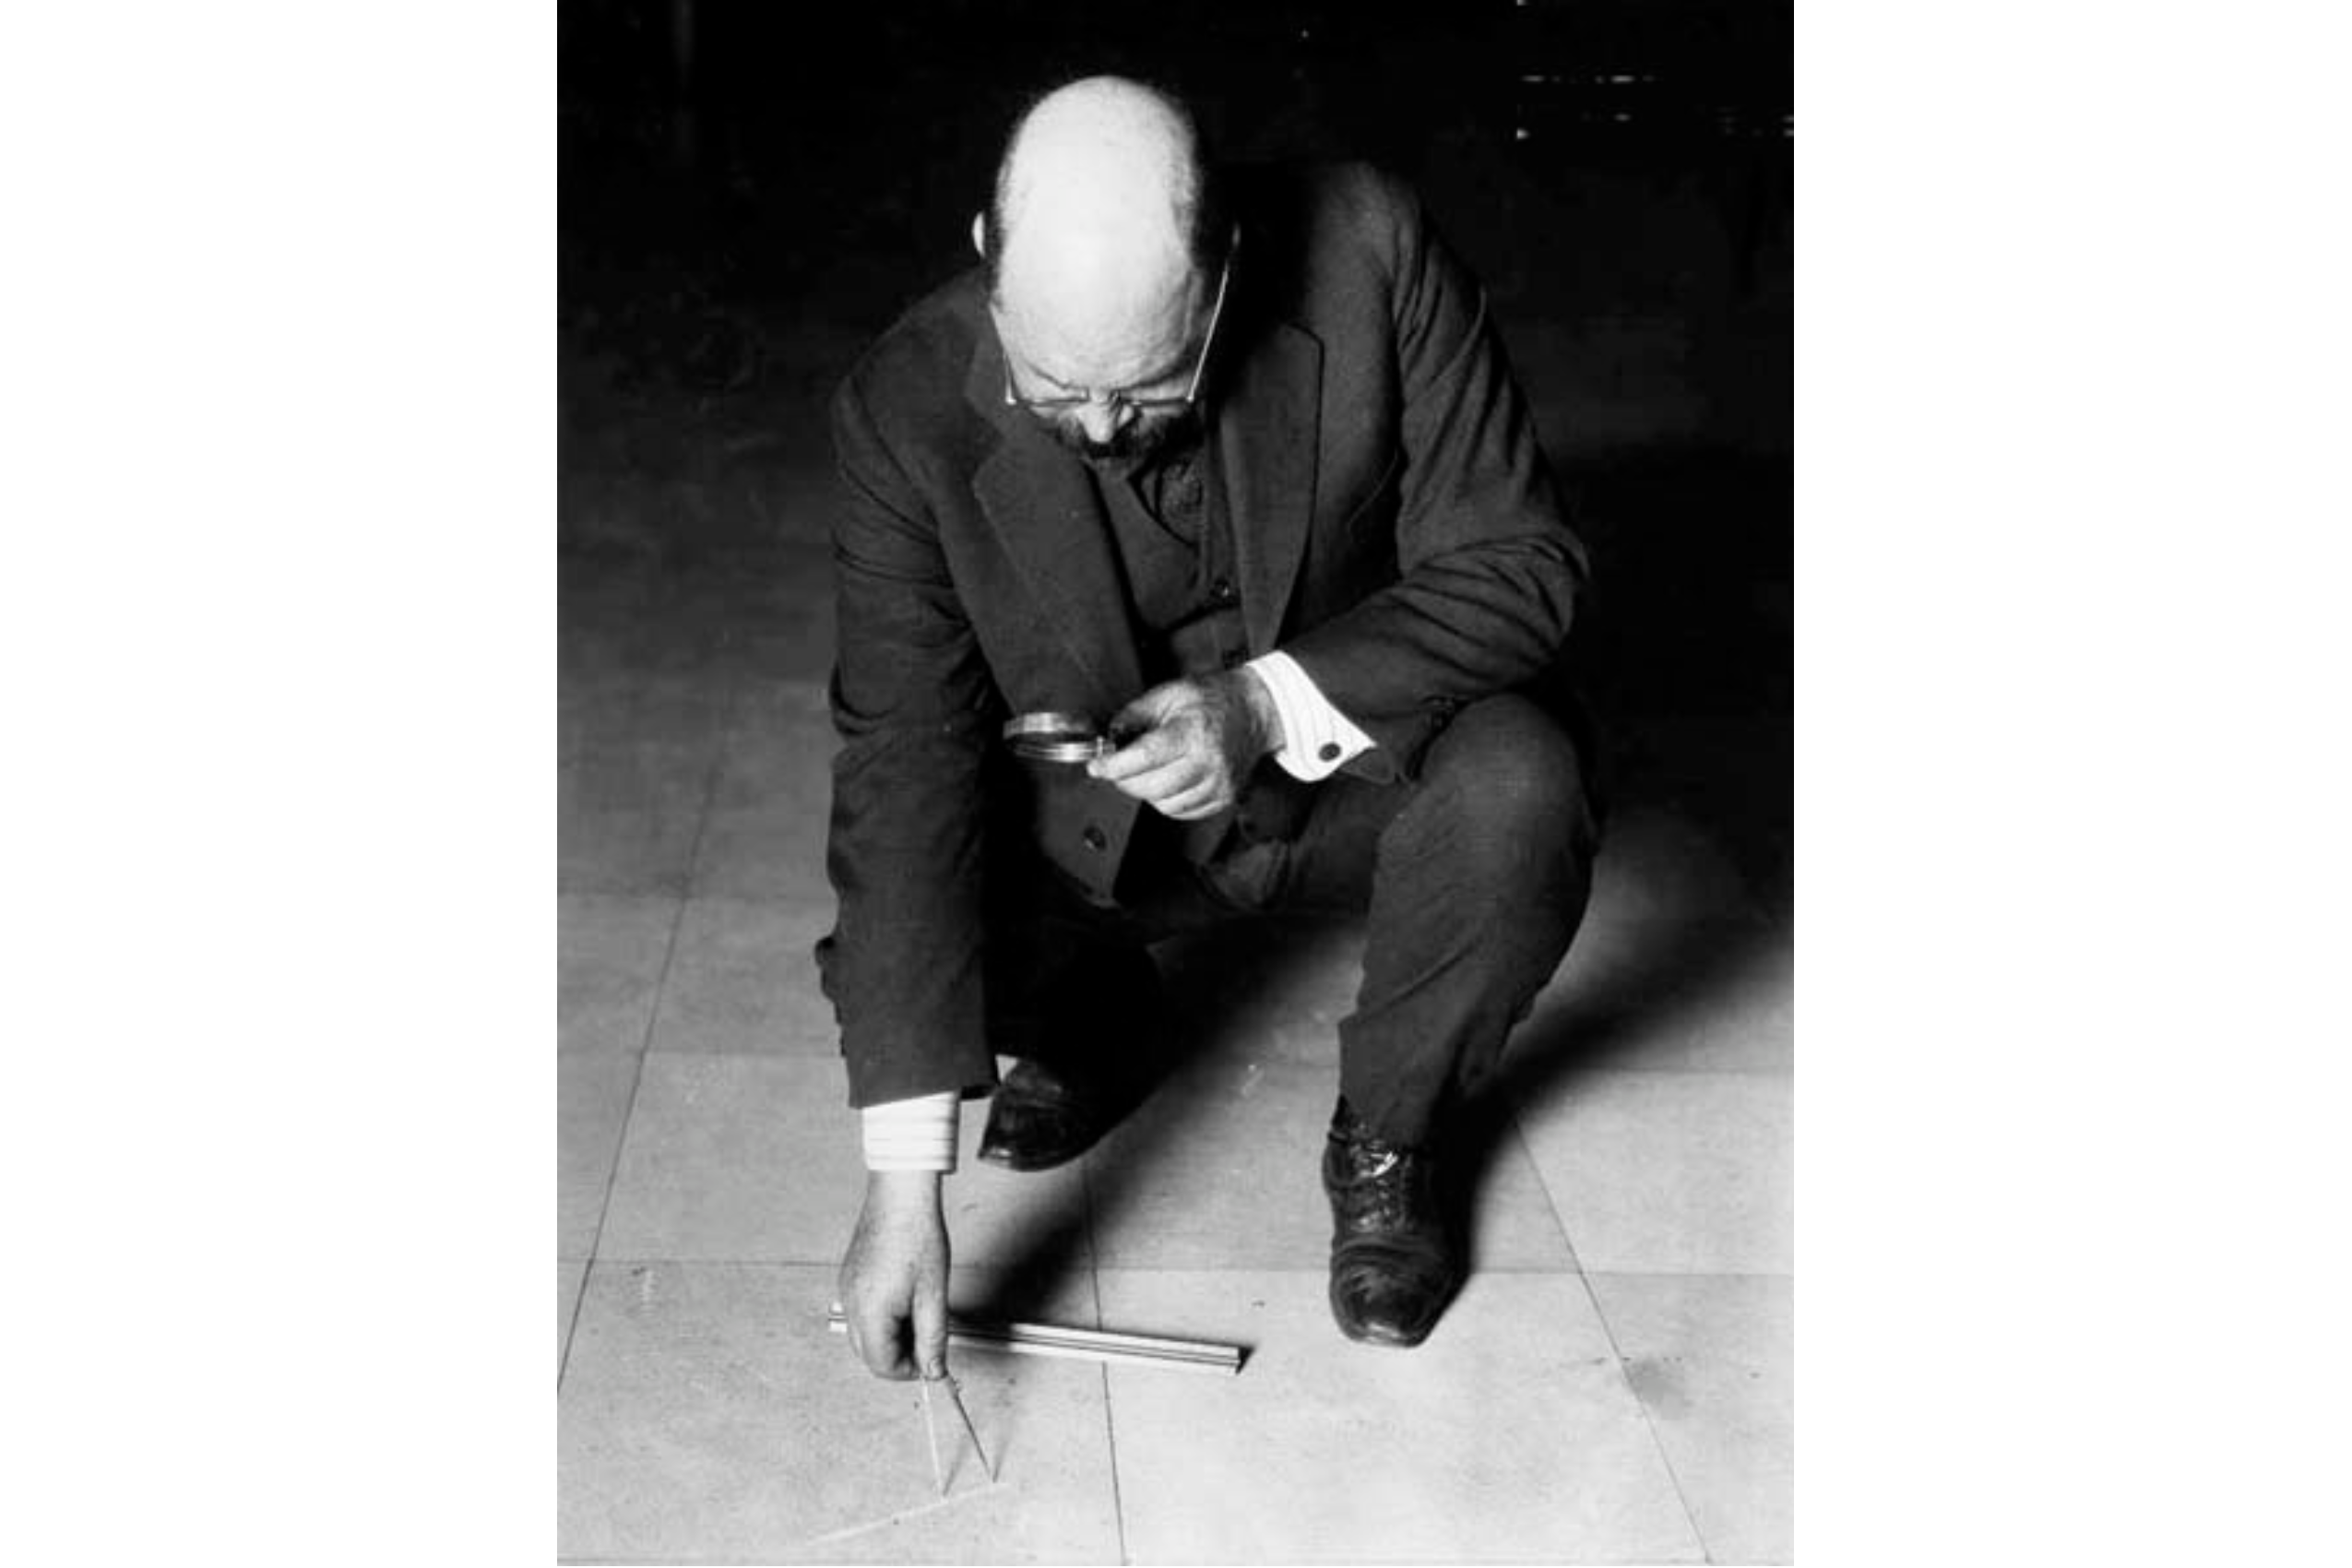 A man wearing a dark colored suit stoops down holding a magnifying glass and pointing at the floor